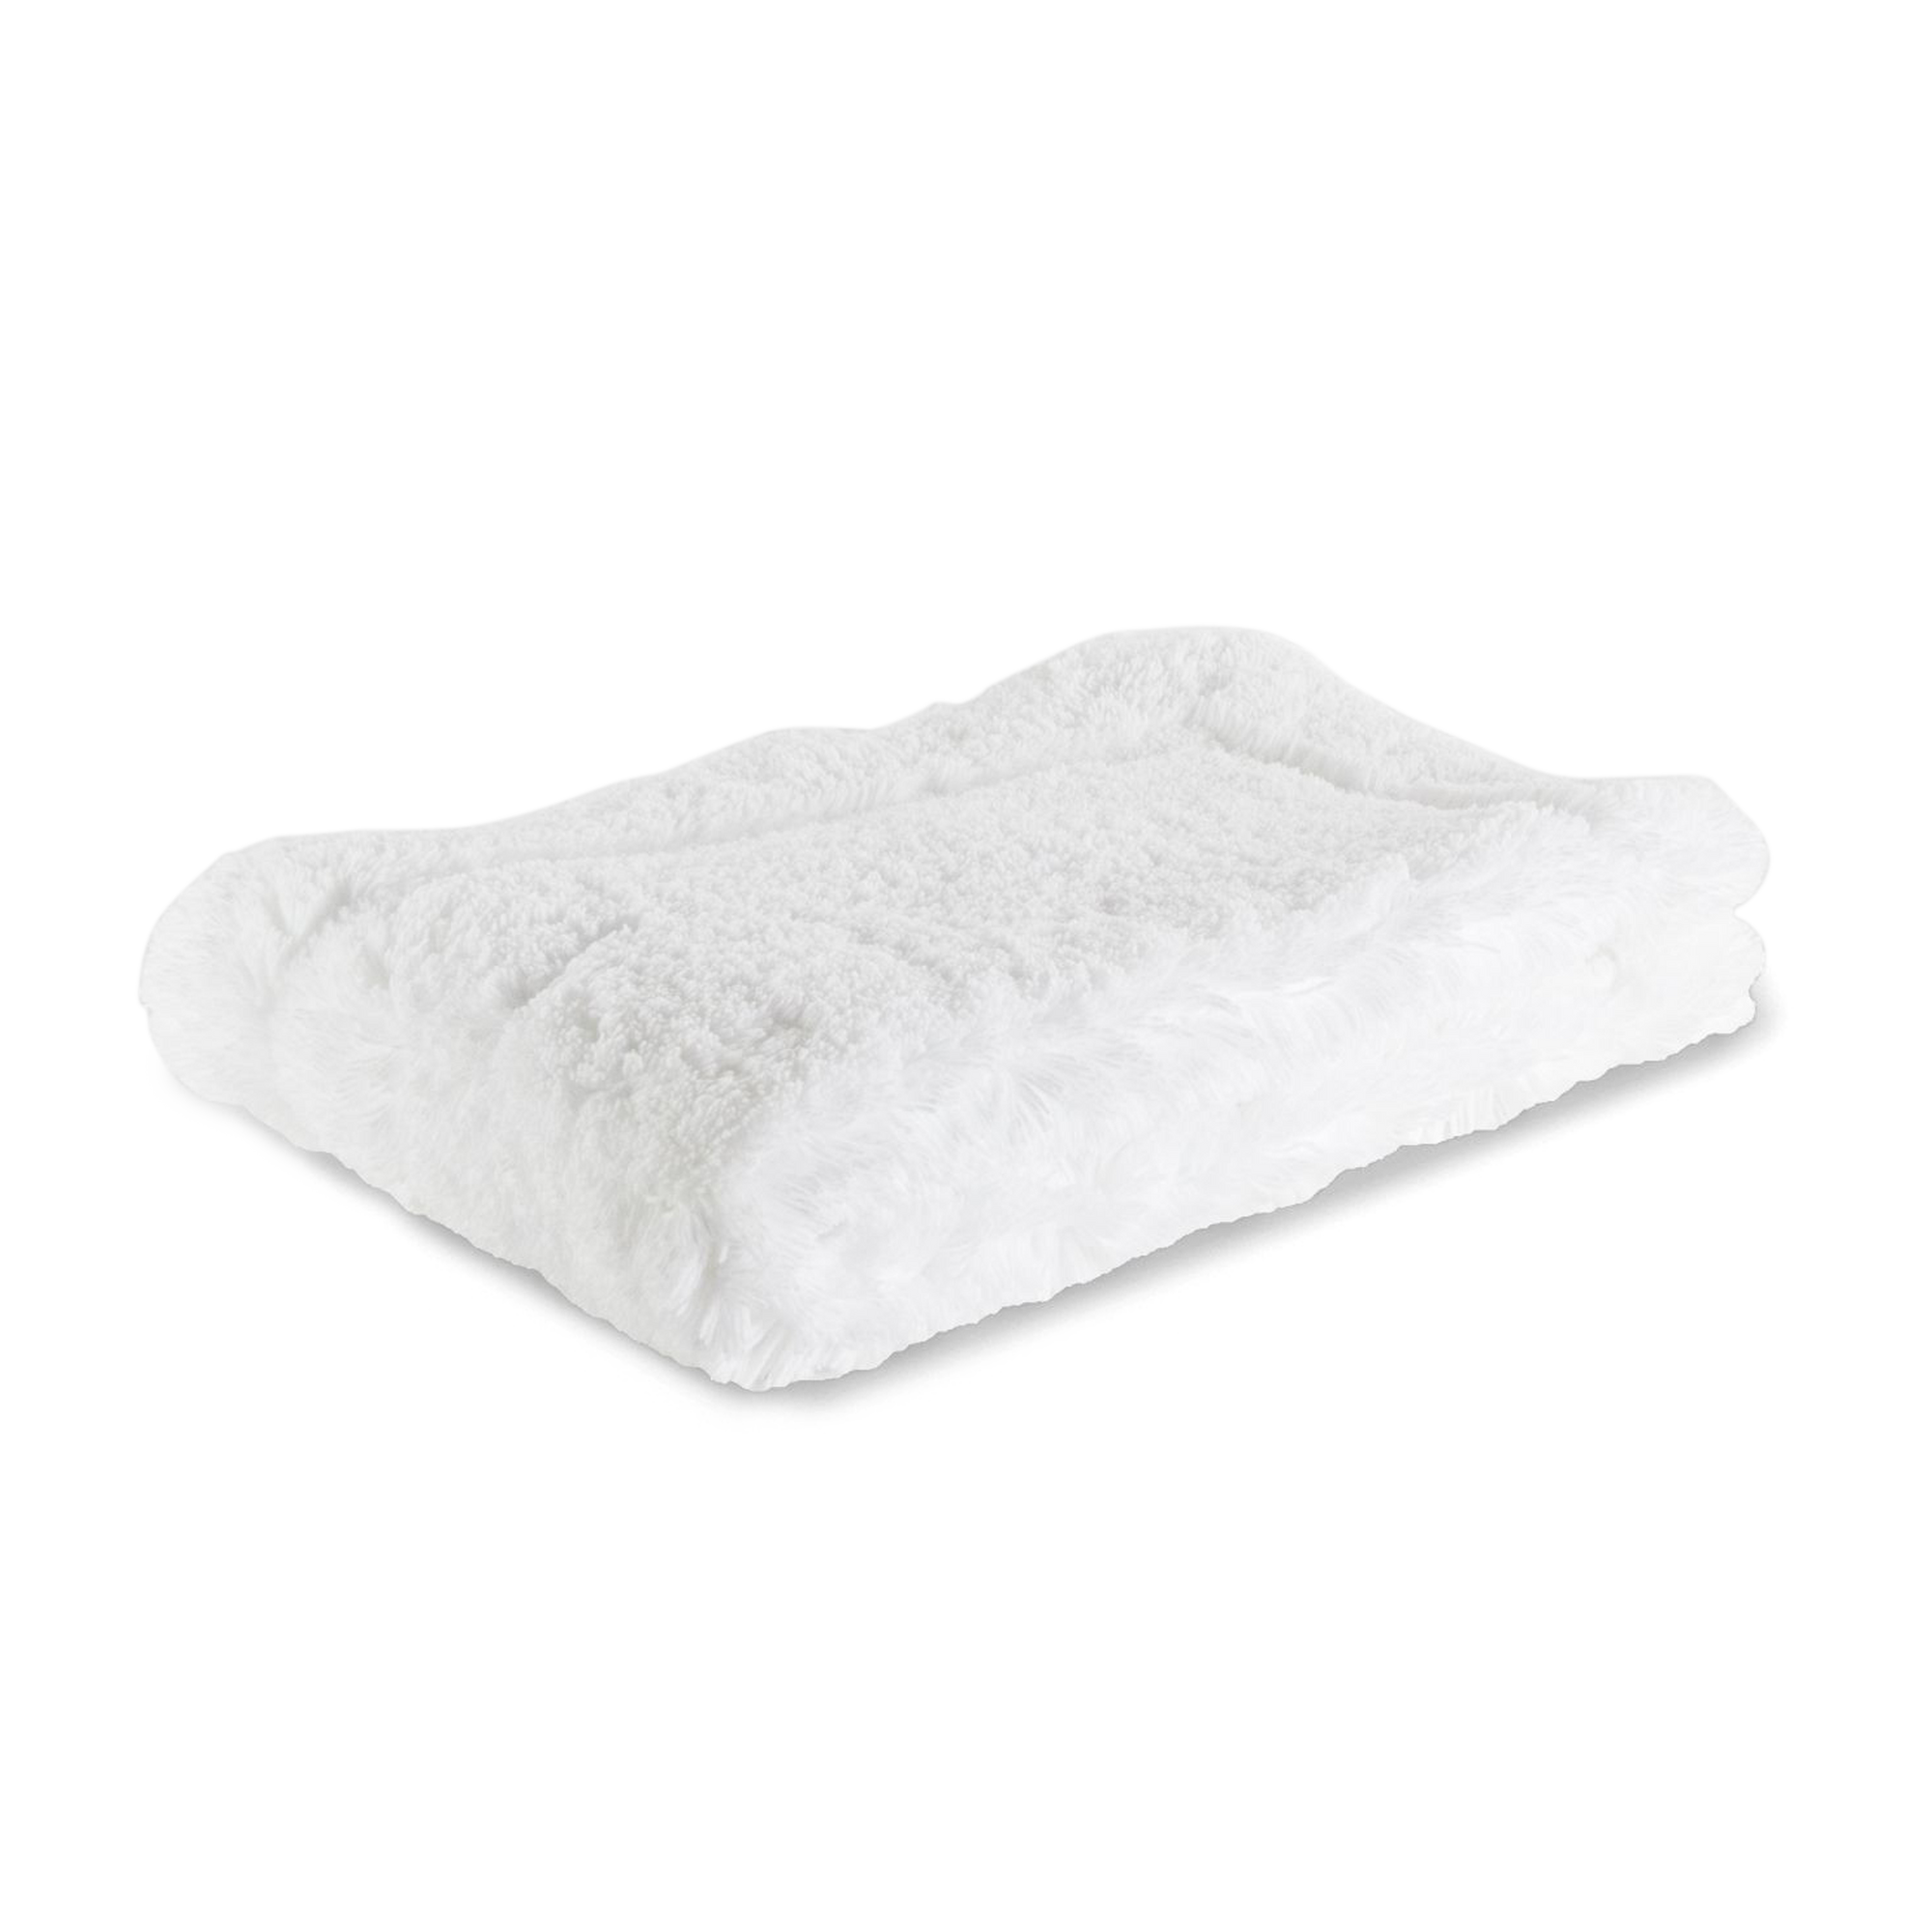 Made from 100% Egyptian combed cotton, the Must Bath Mat provides a soft and sumptuous layer underfoot.